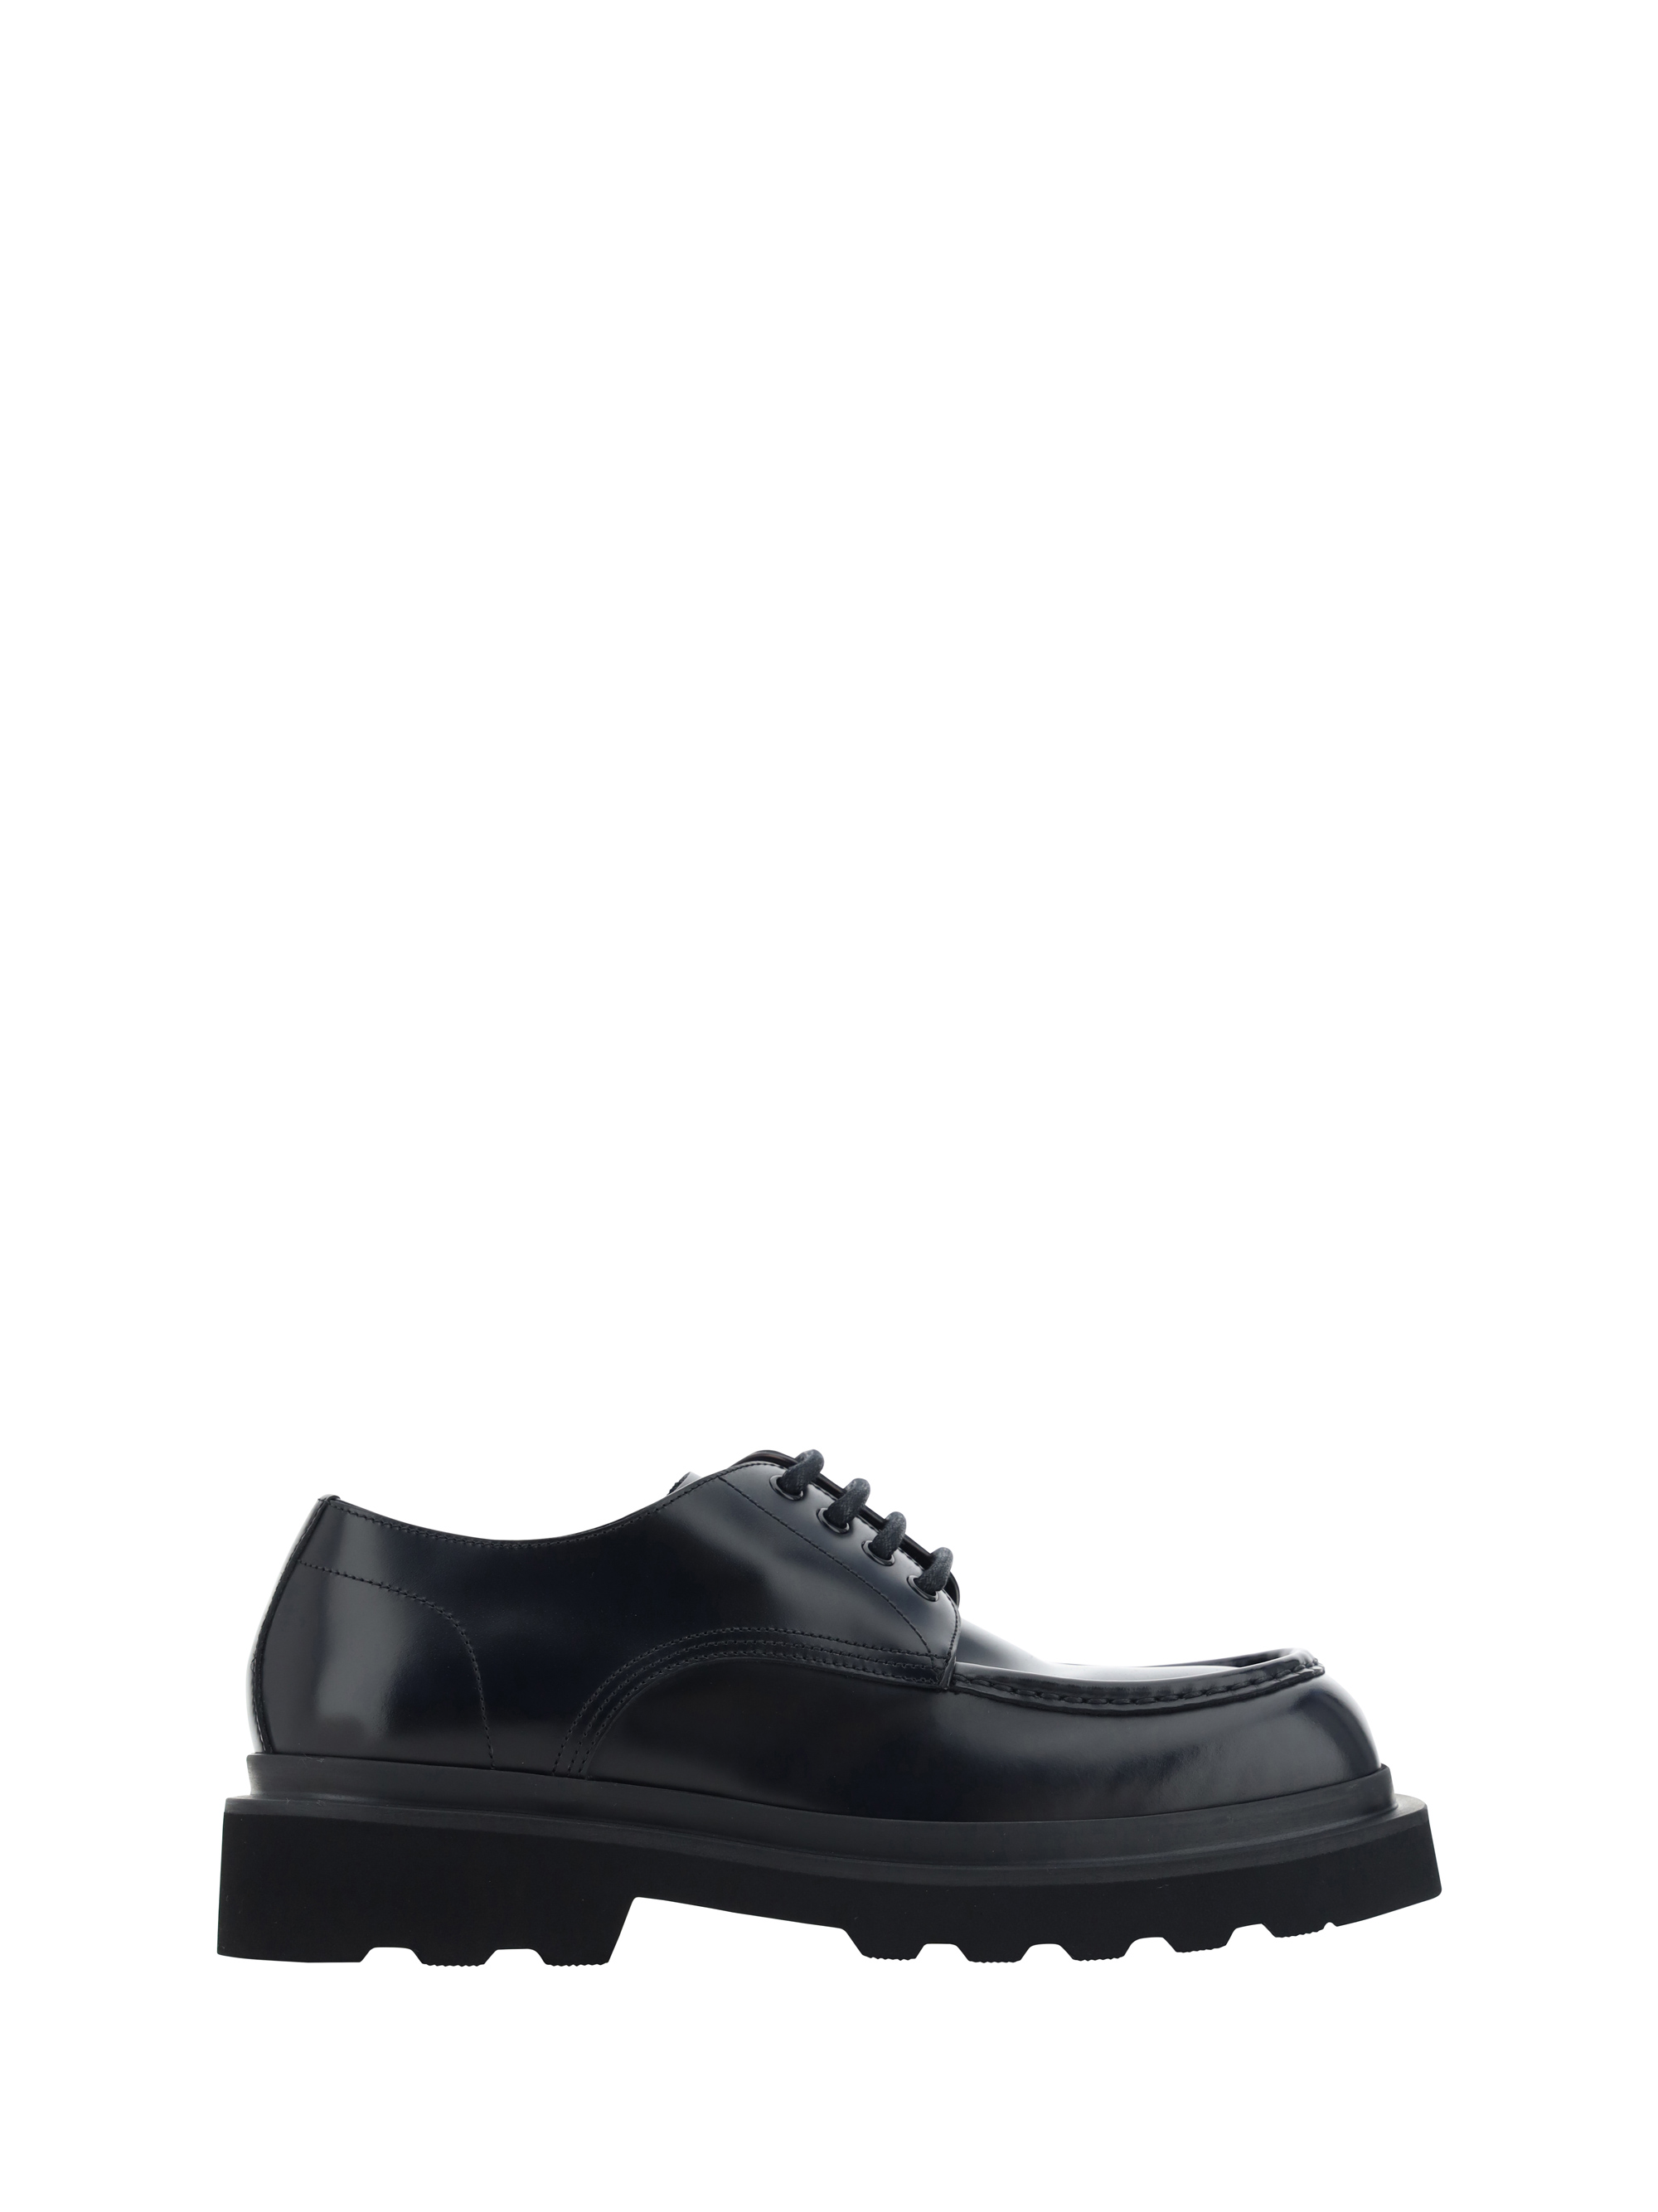 Dolce & Gabbana - Lace-Up Shoes